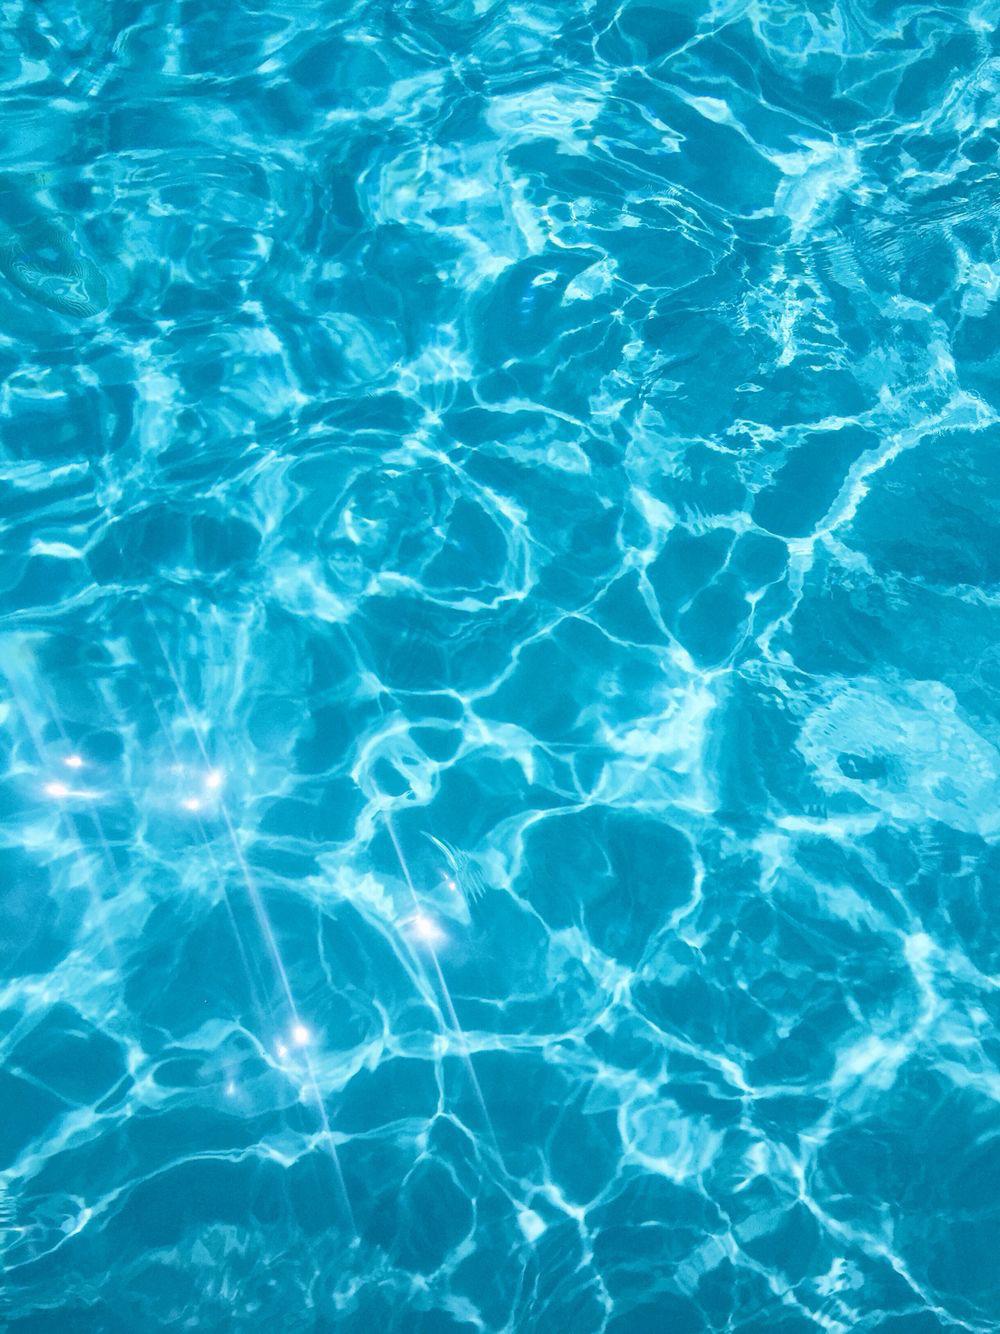 I know this is a weird request, but does anyone have a live wallpaper of a pool like this? I would love it for my lock screen and am struggling to find